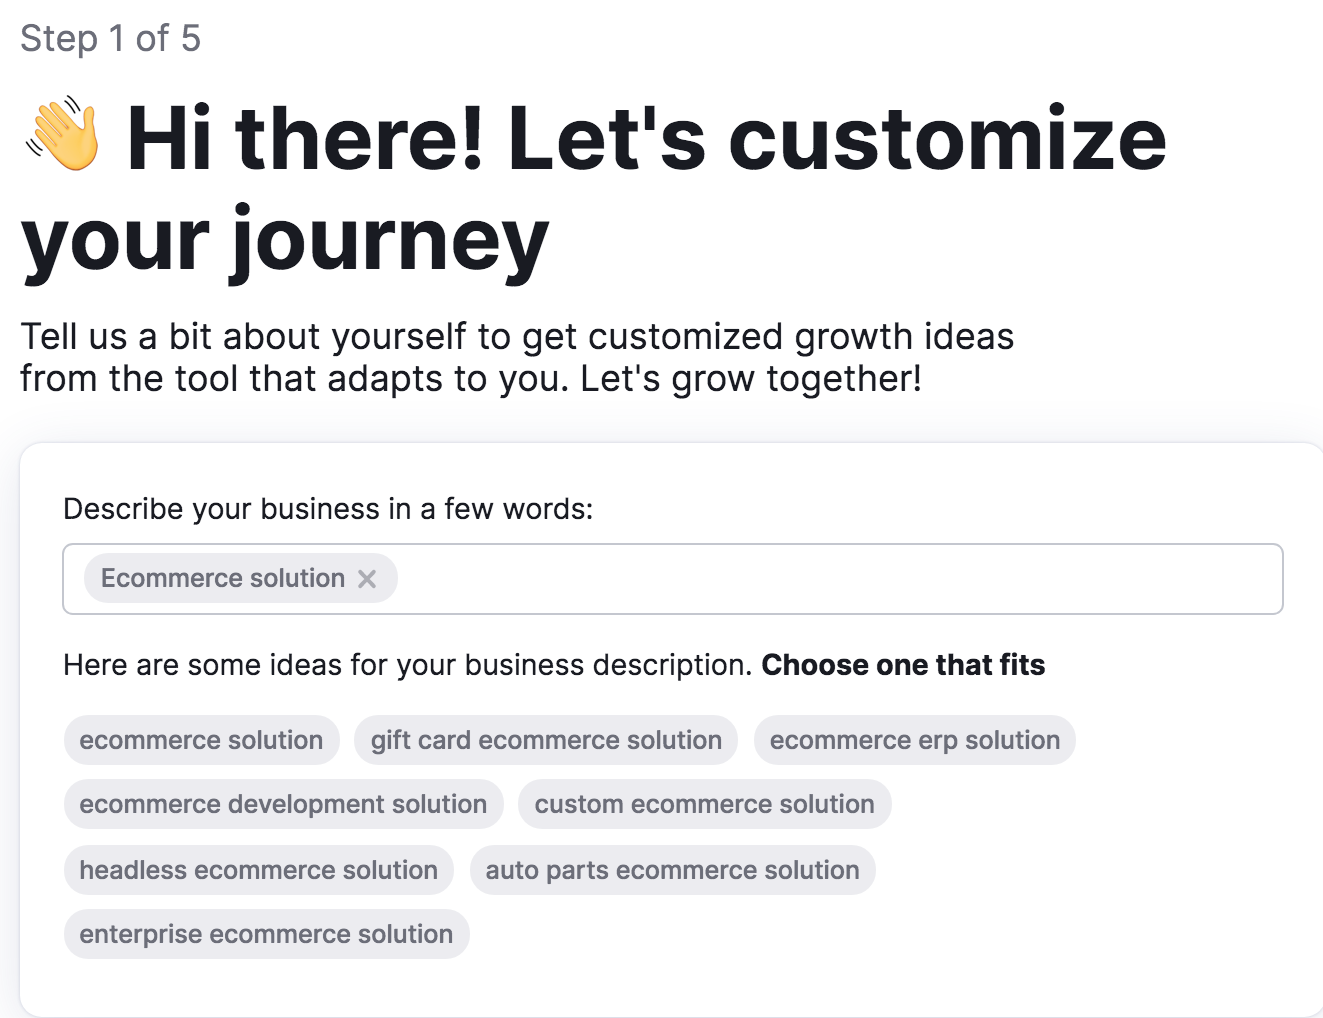 Contentshake AI showing a field to describe your business in a few words. The chosen description is Ecommerce solution.